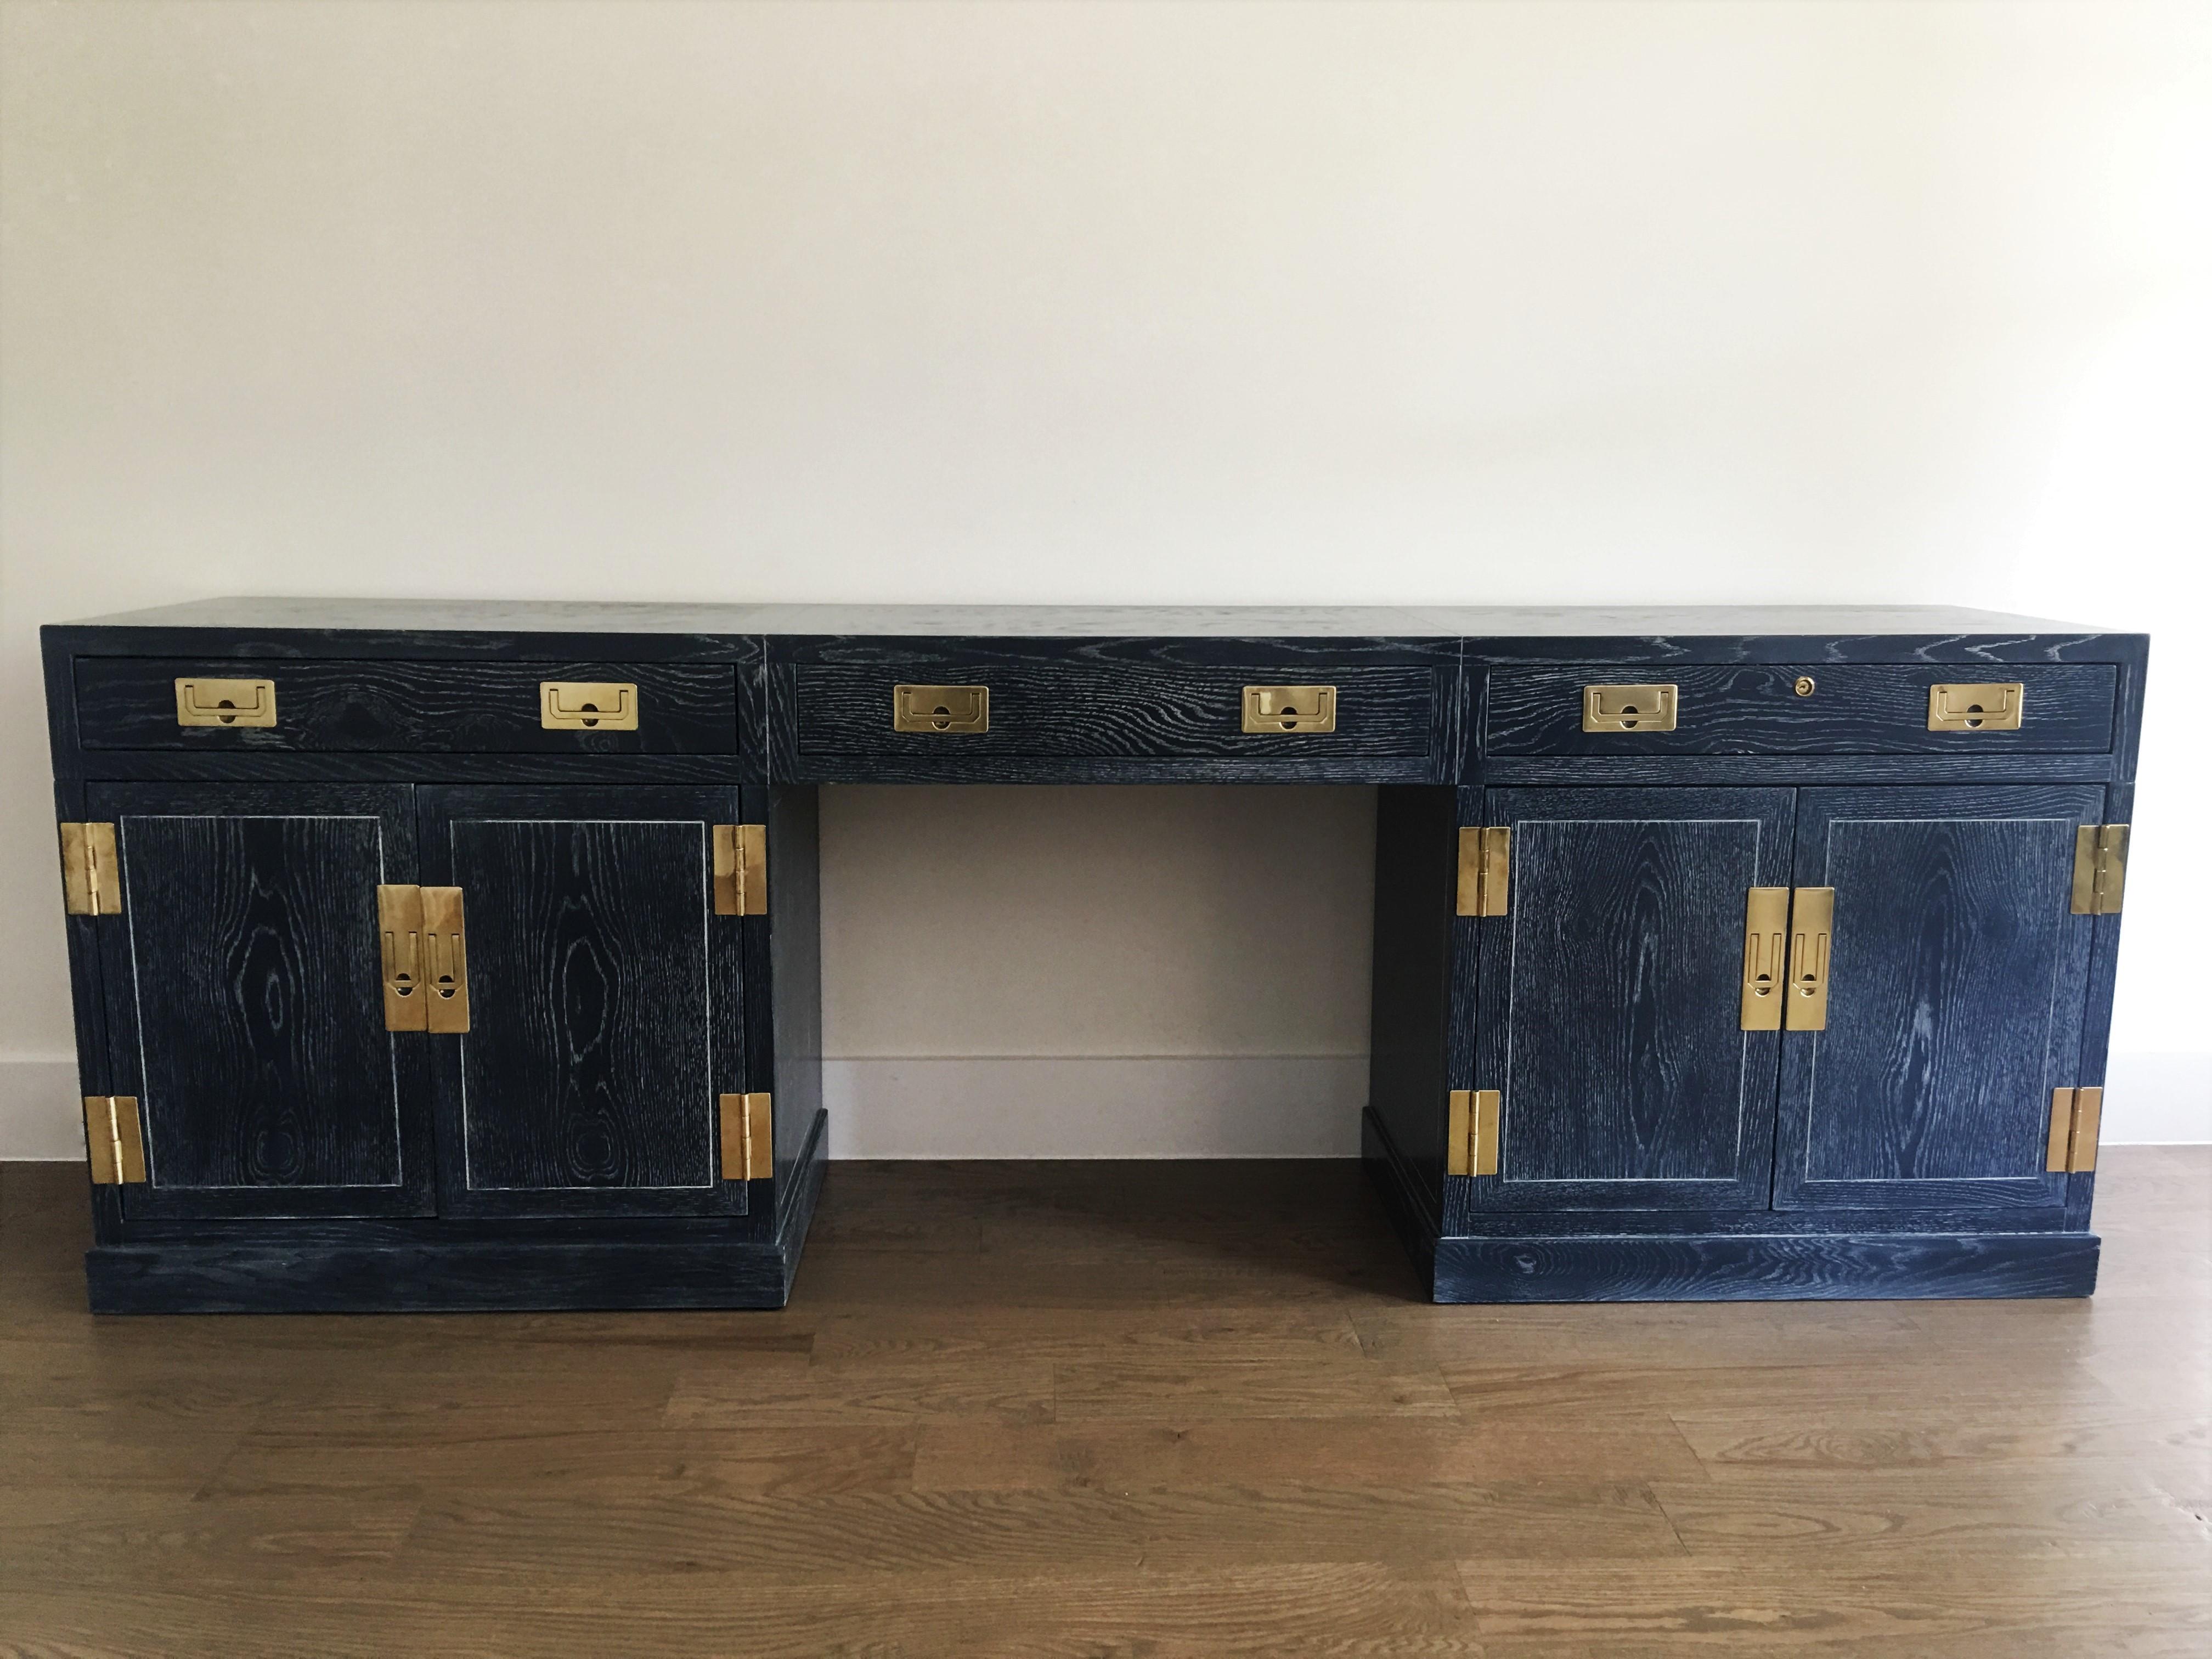 A vintage Campaign style cerused oak and brass credenza or desk by Henredon has been newly refinished. This rectangular top desk features a kneehole drawer flanked by a drawer over two cabinet doors to each side. The drawers and cabinet doors